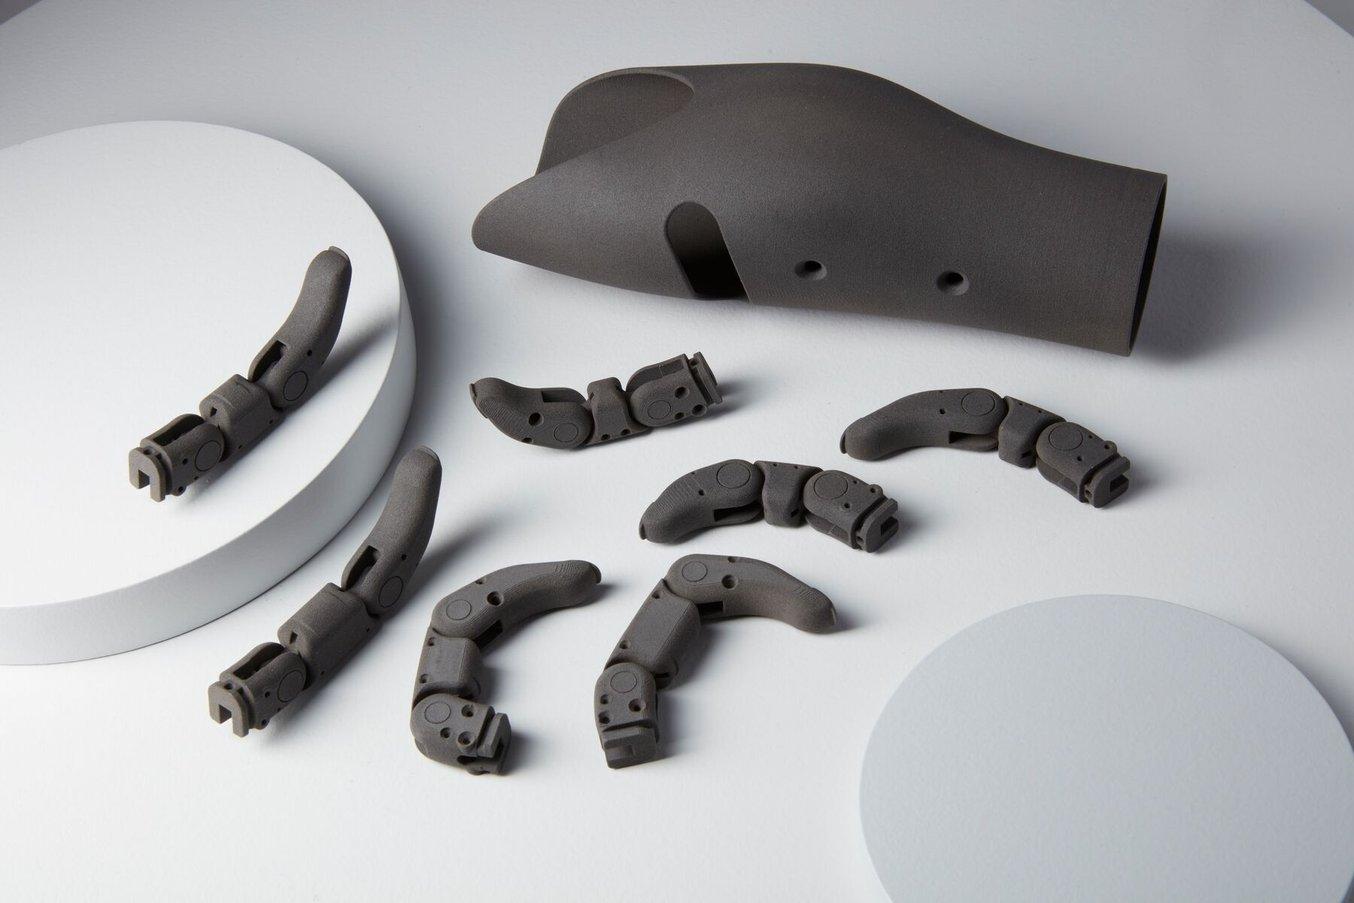 3D printed prototypes for prosthetic fingers